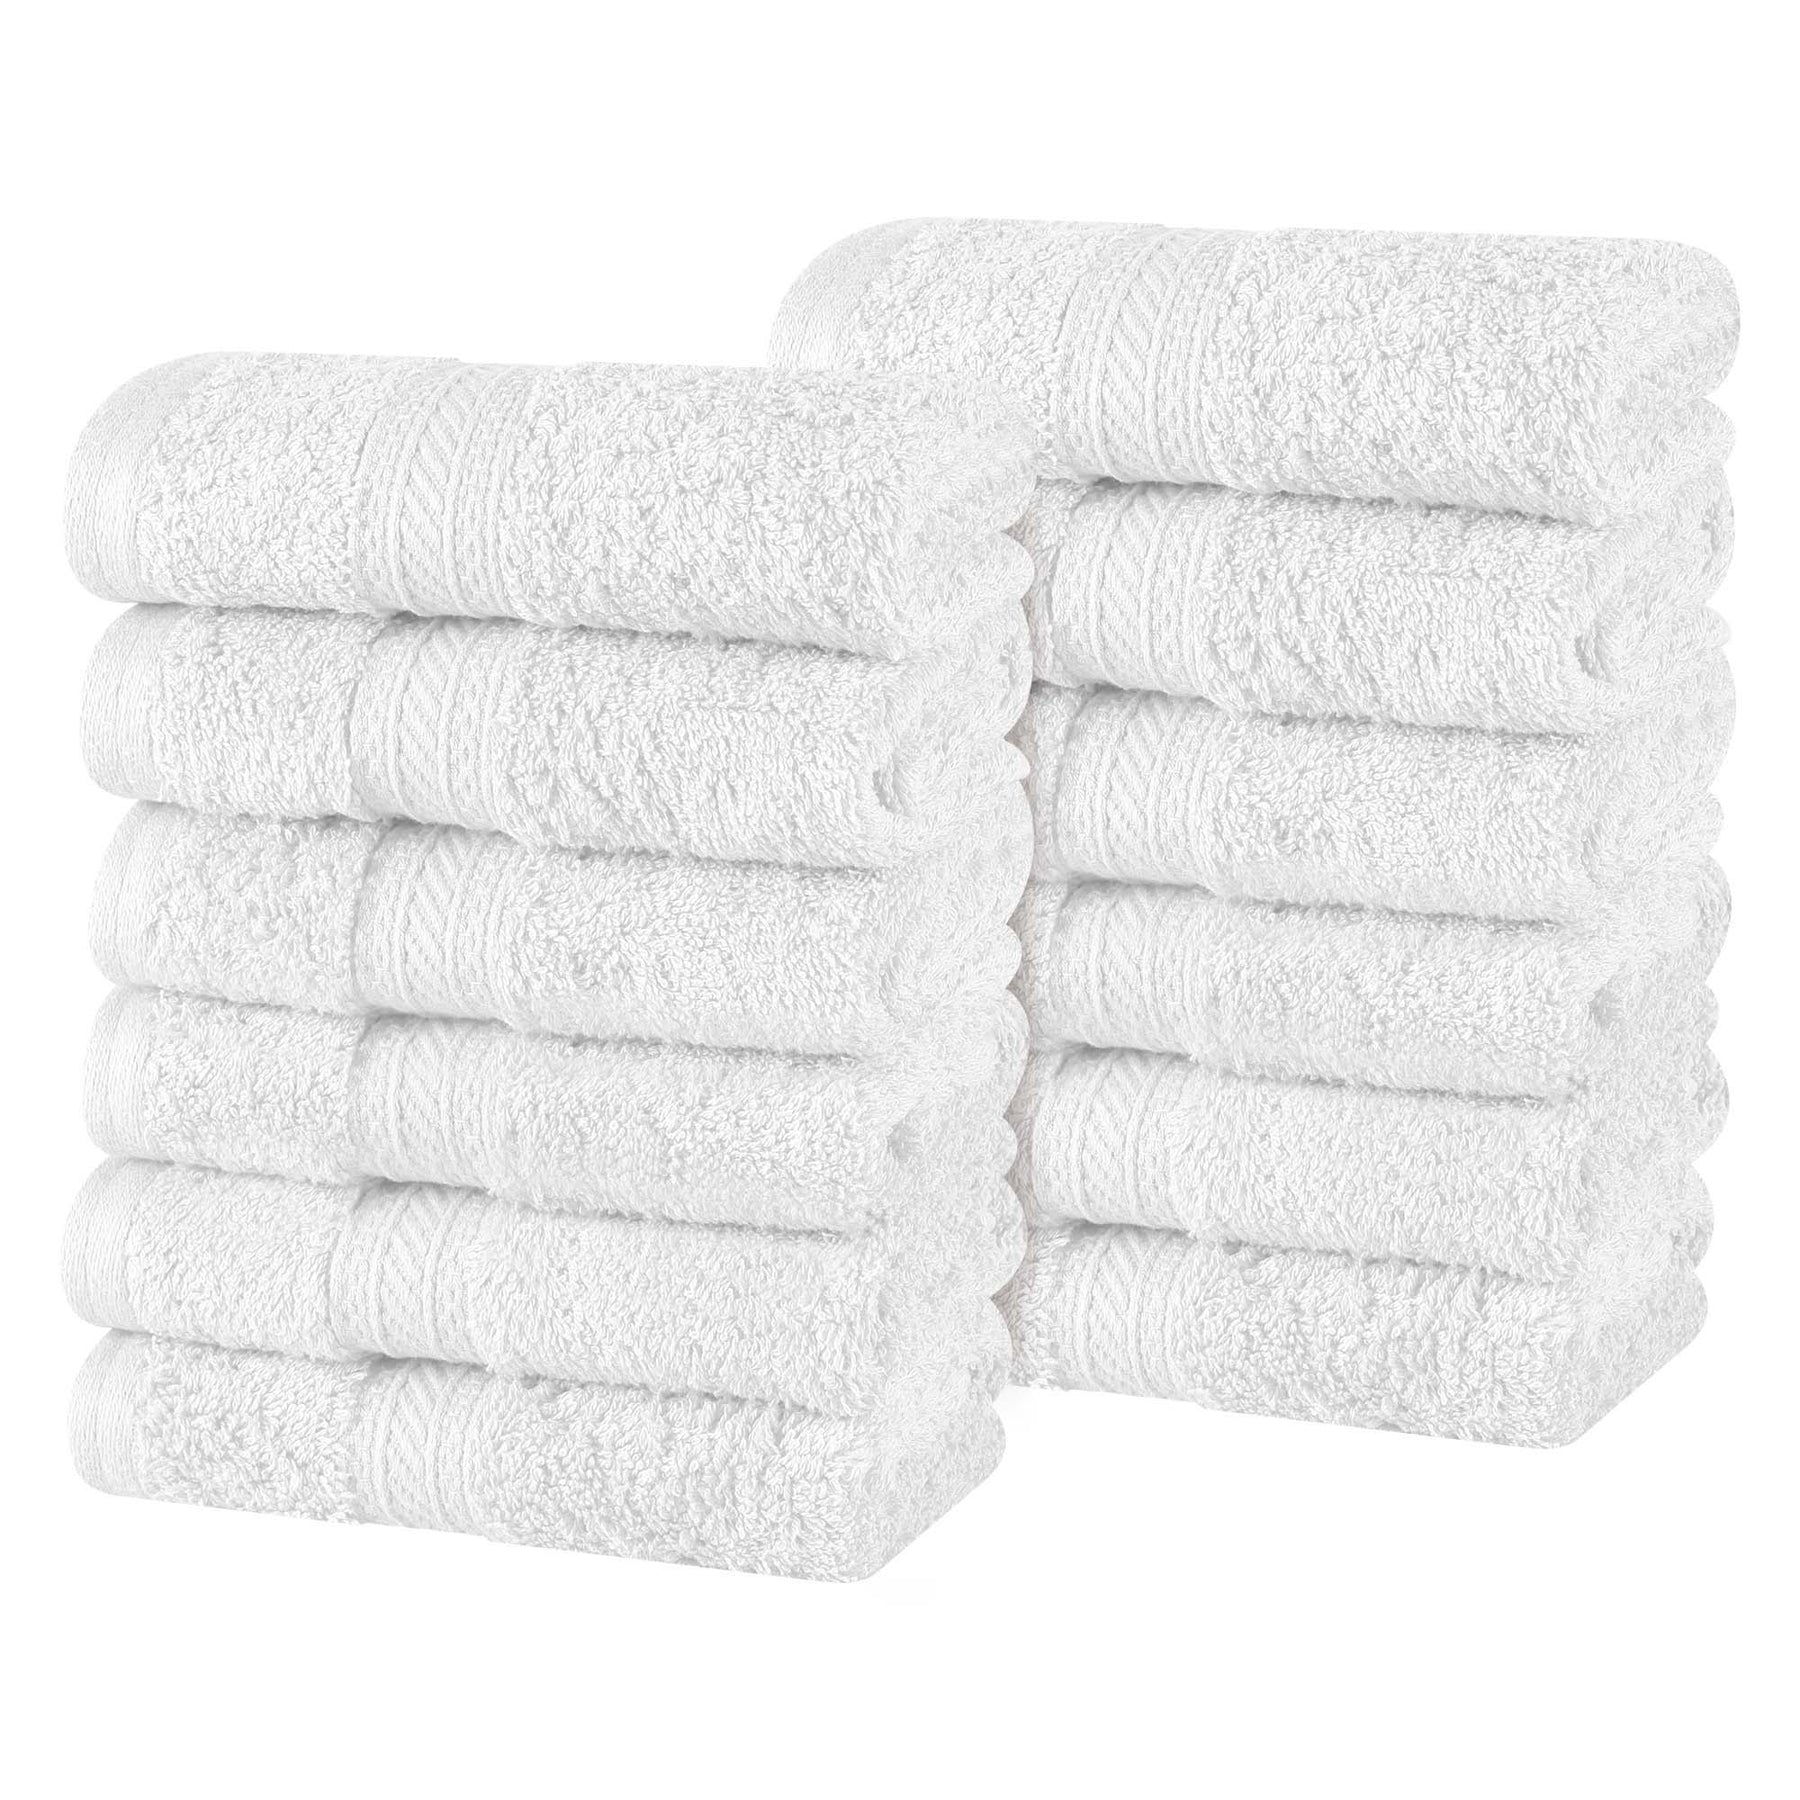 Atlas Combed Cotton Highly Absorbent Solid Face Towels / Washcloths - White